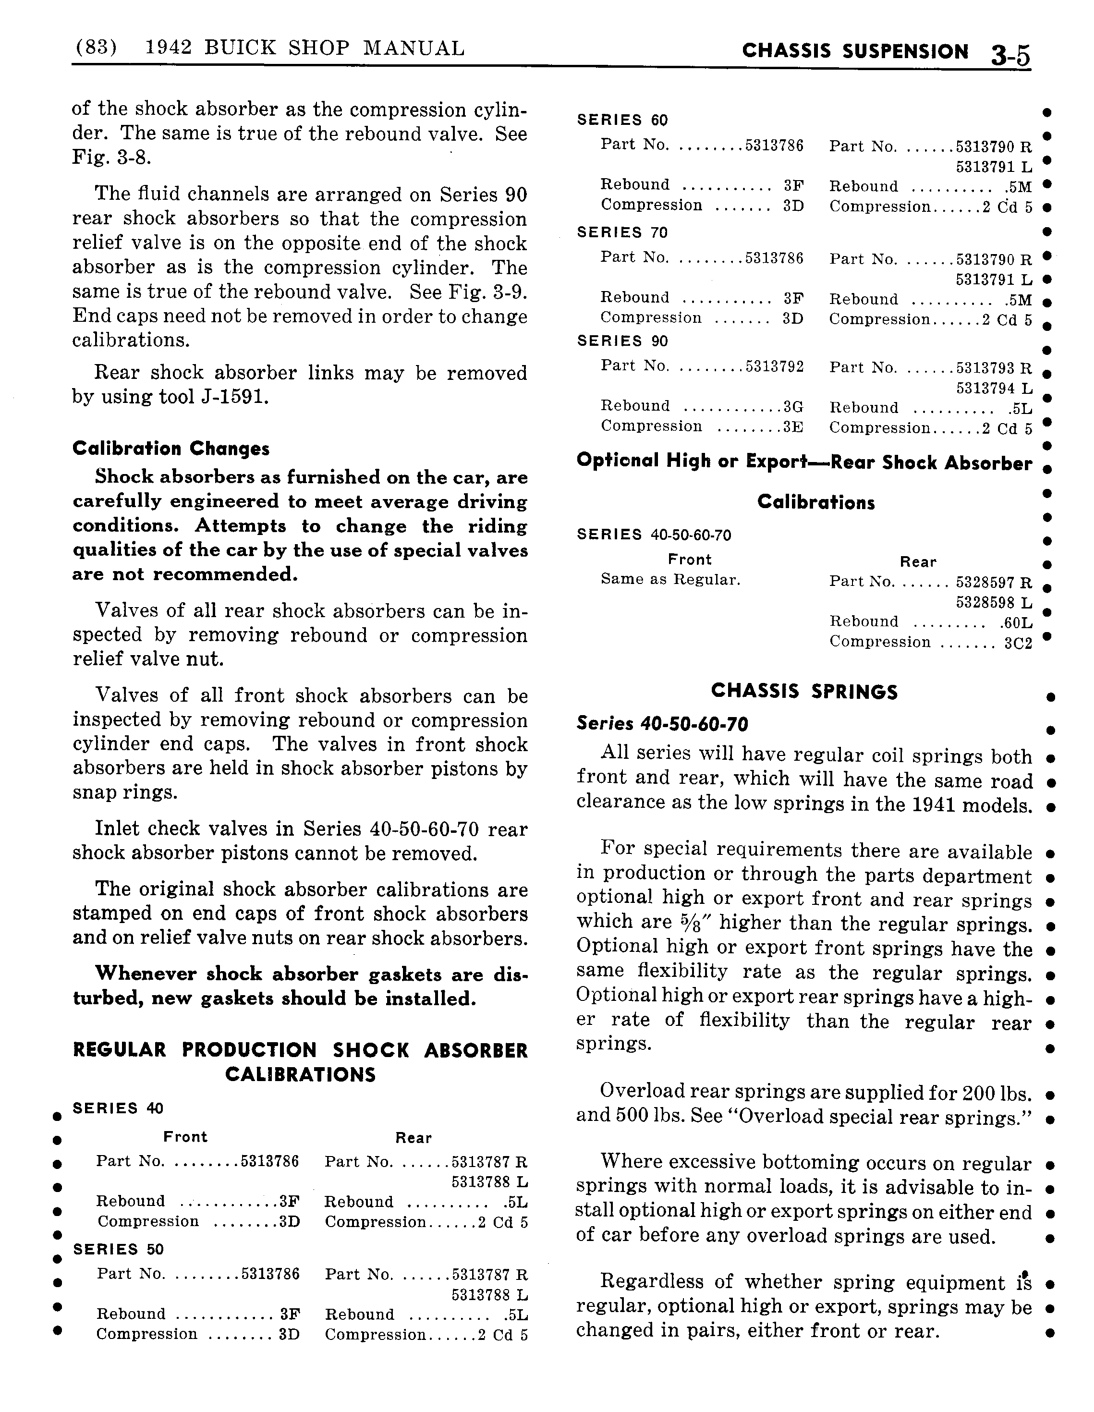 n_04 1942 Buick Shop Manual - Chassis Suspension-005-005.jpg